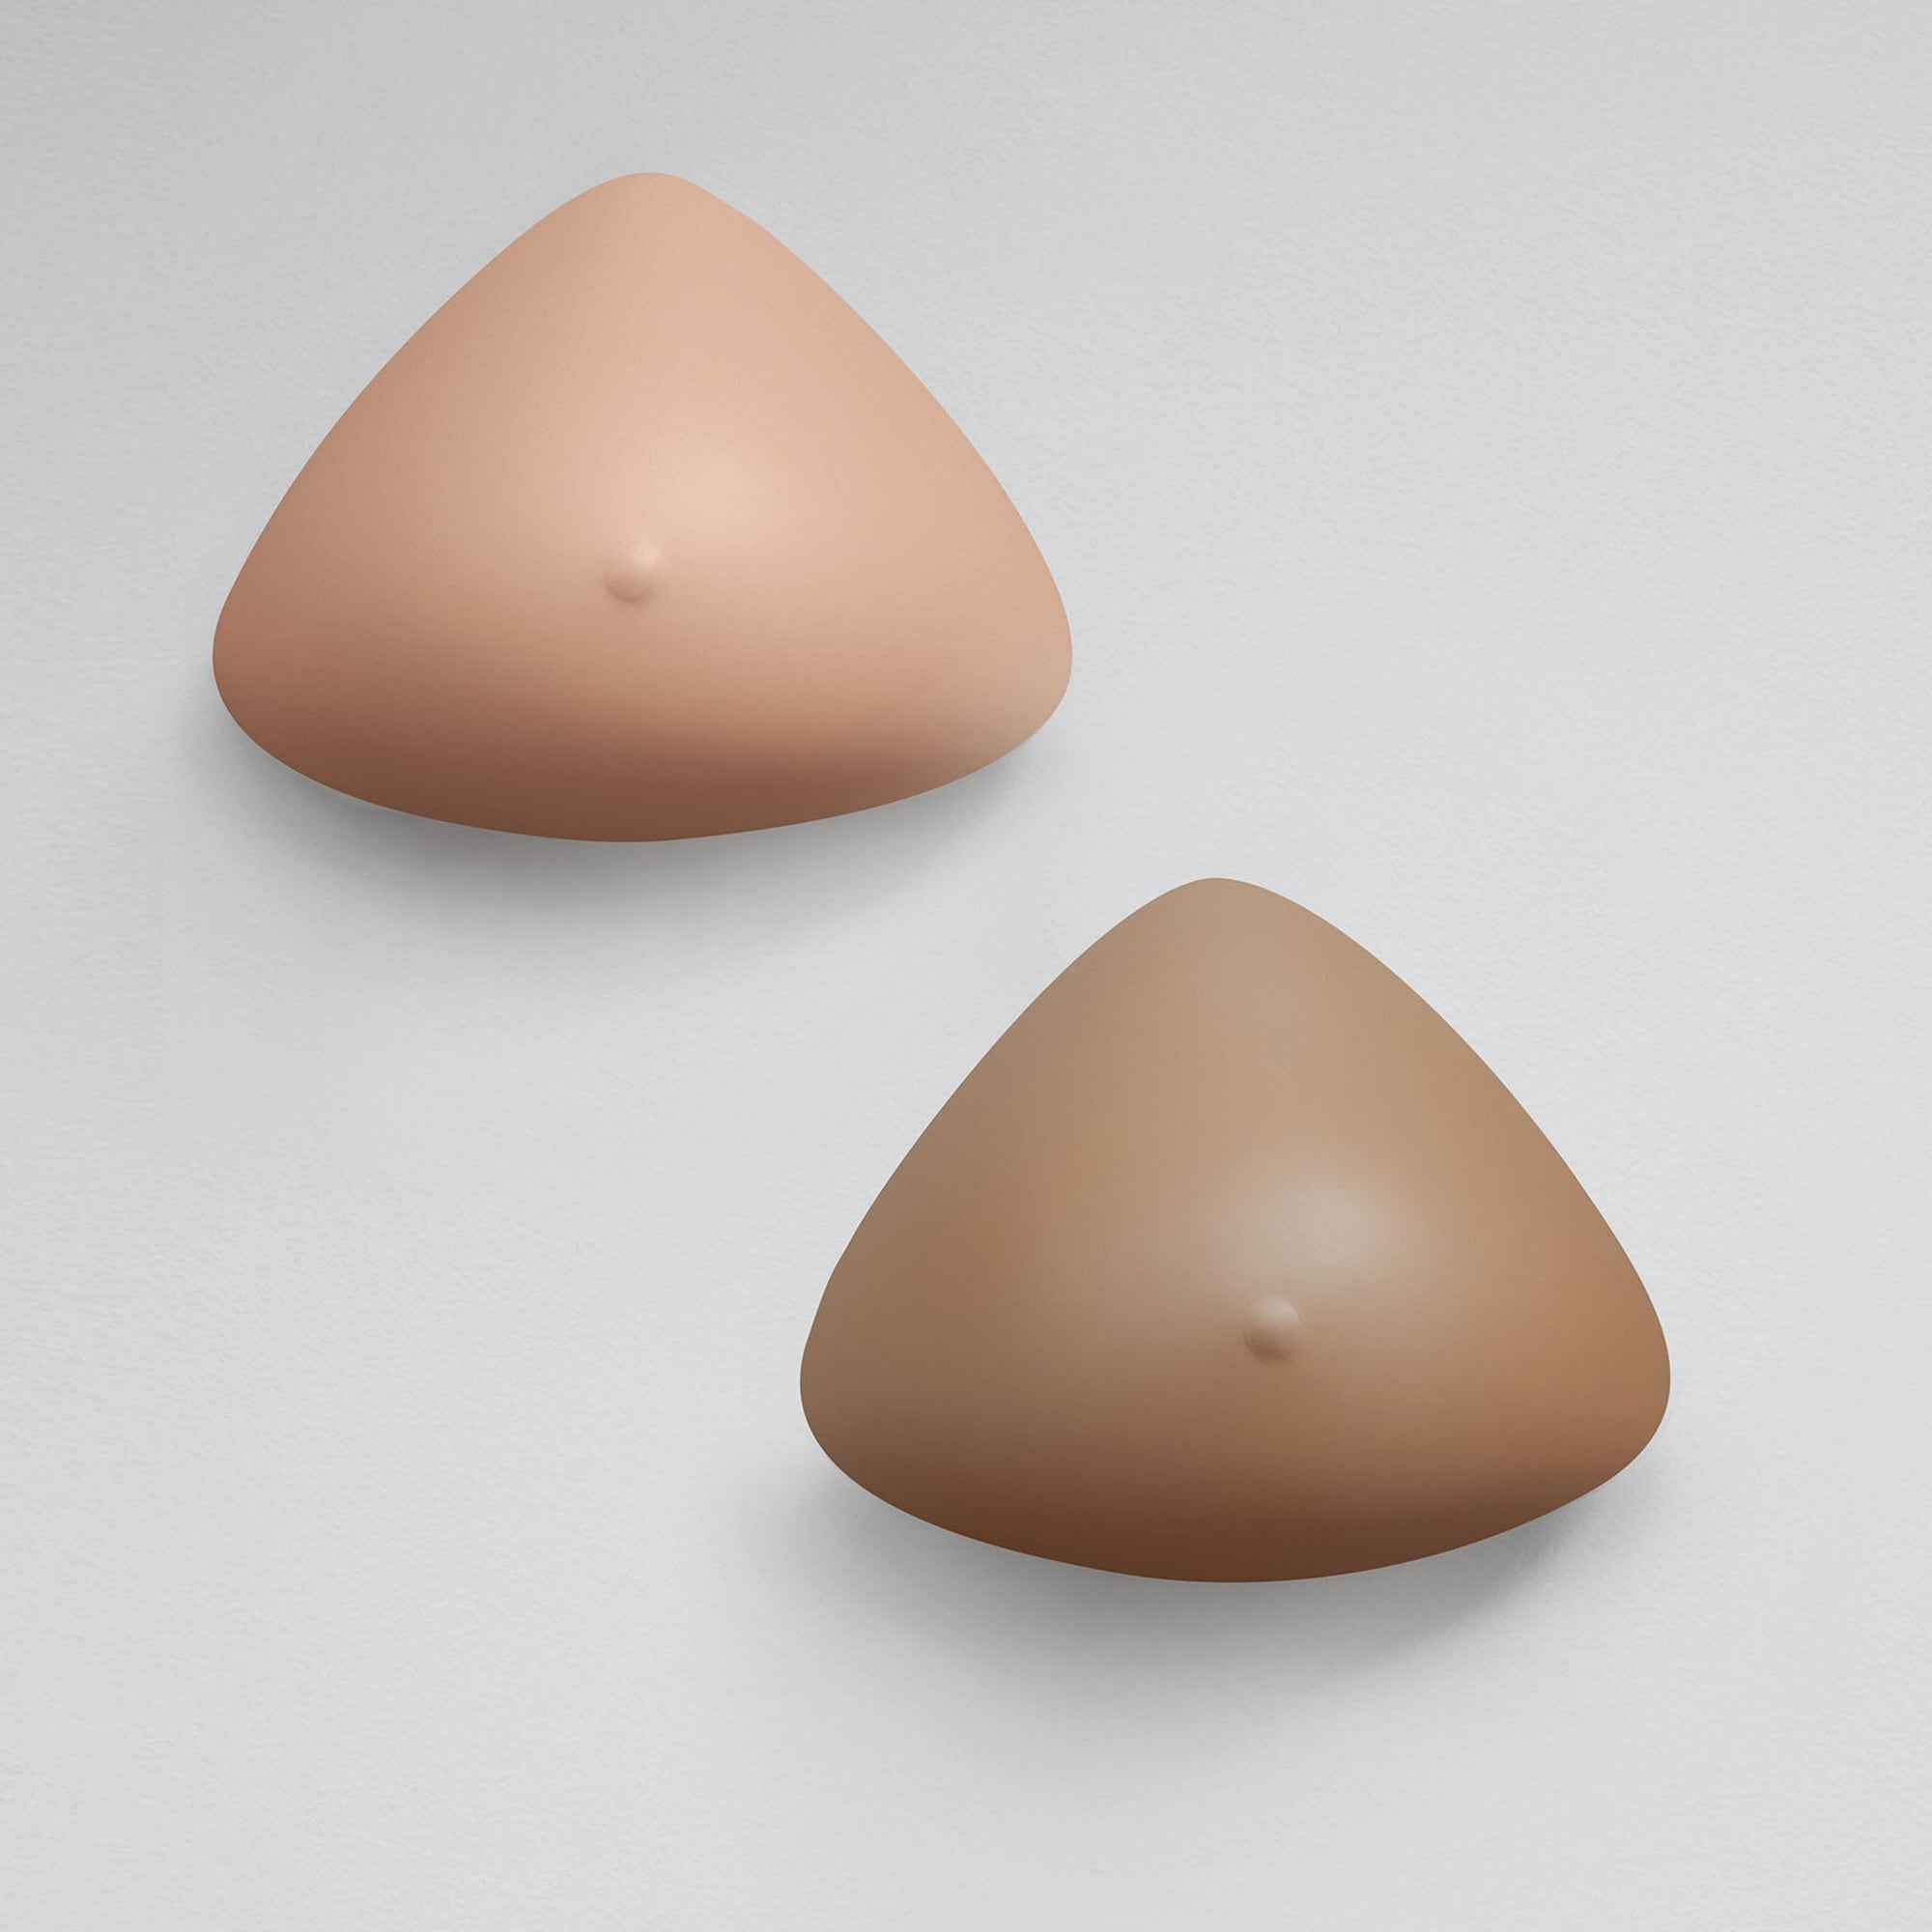 Natura Light Breast Form, shown in Tawny, front and back view.